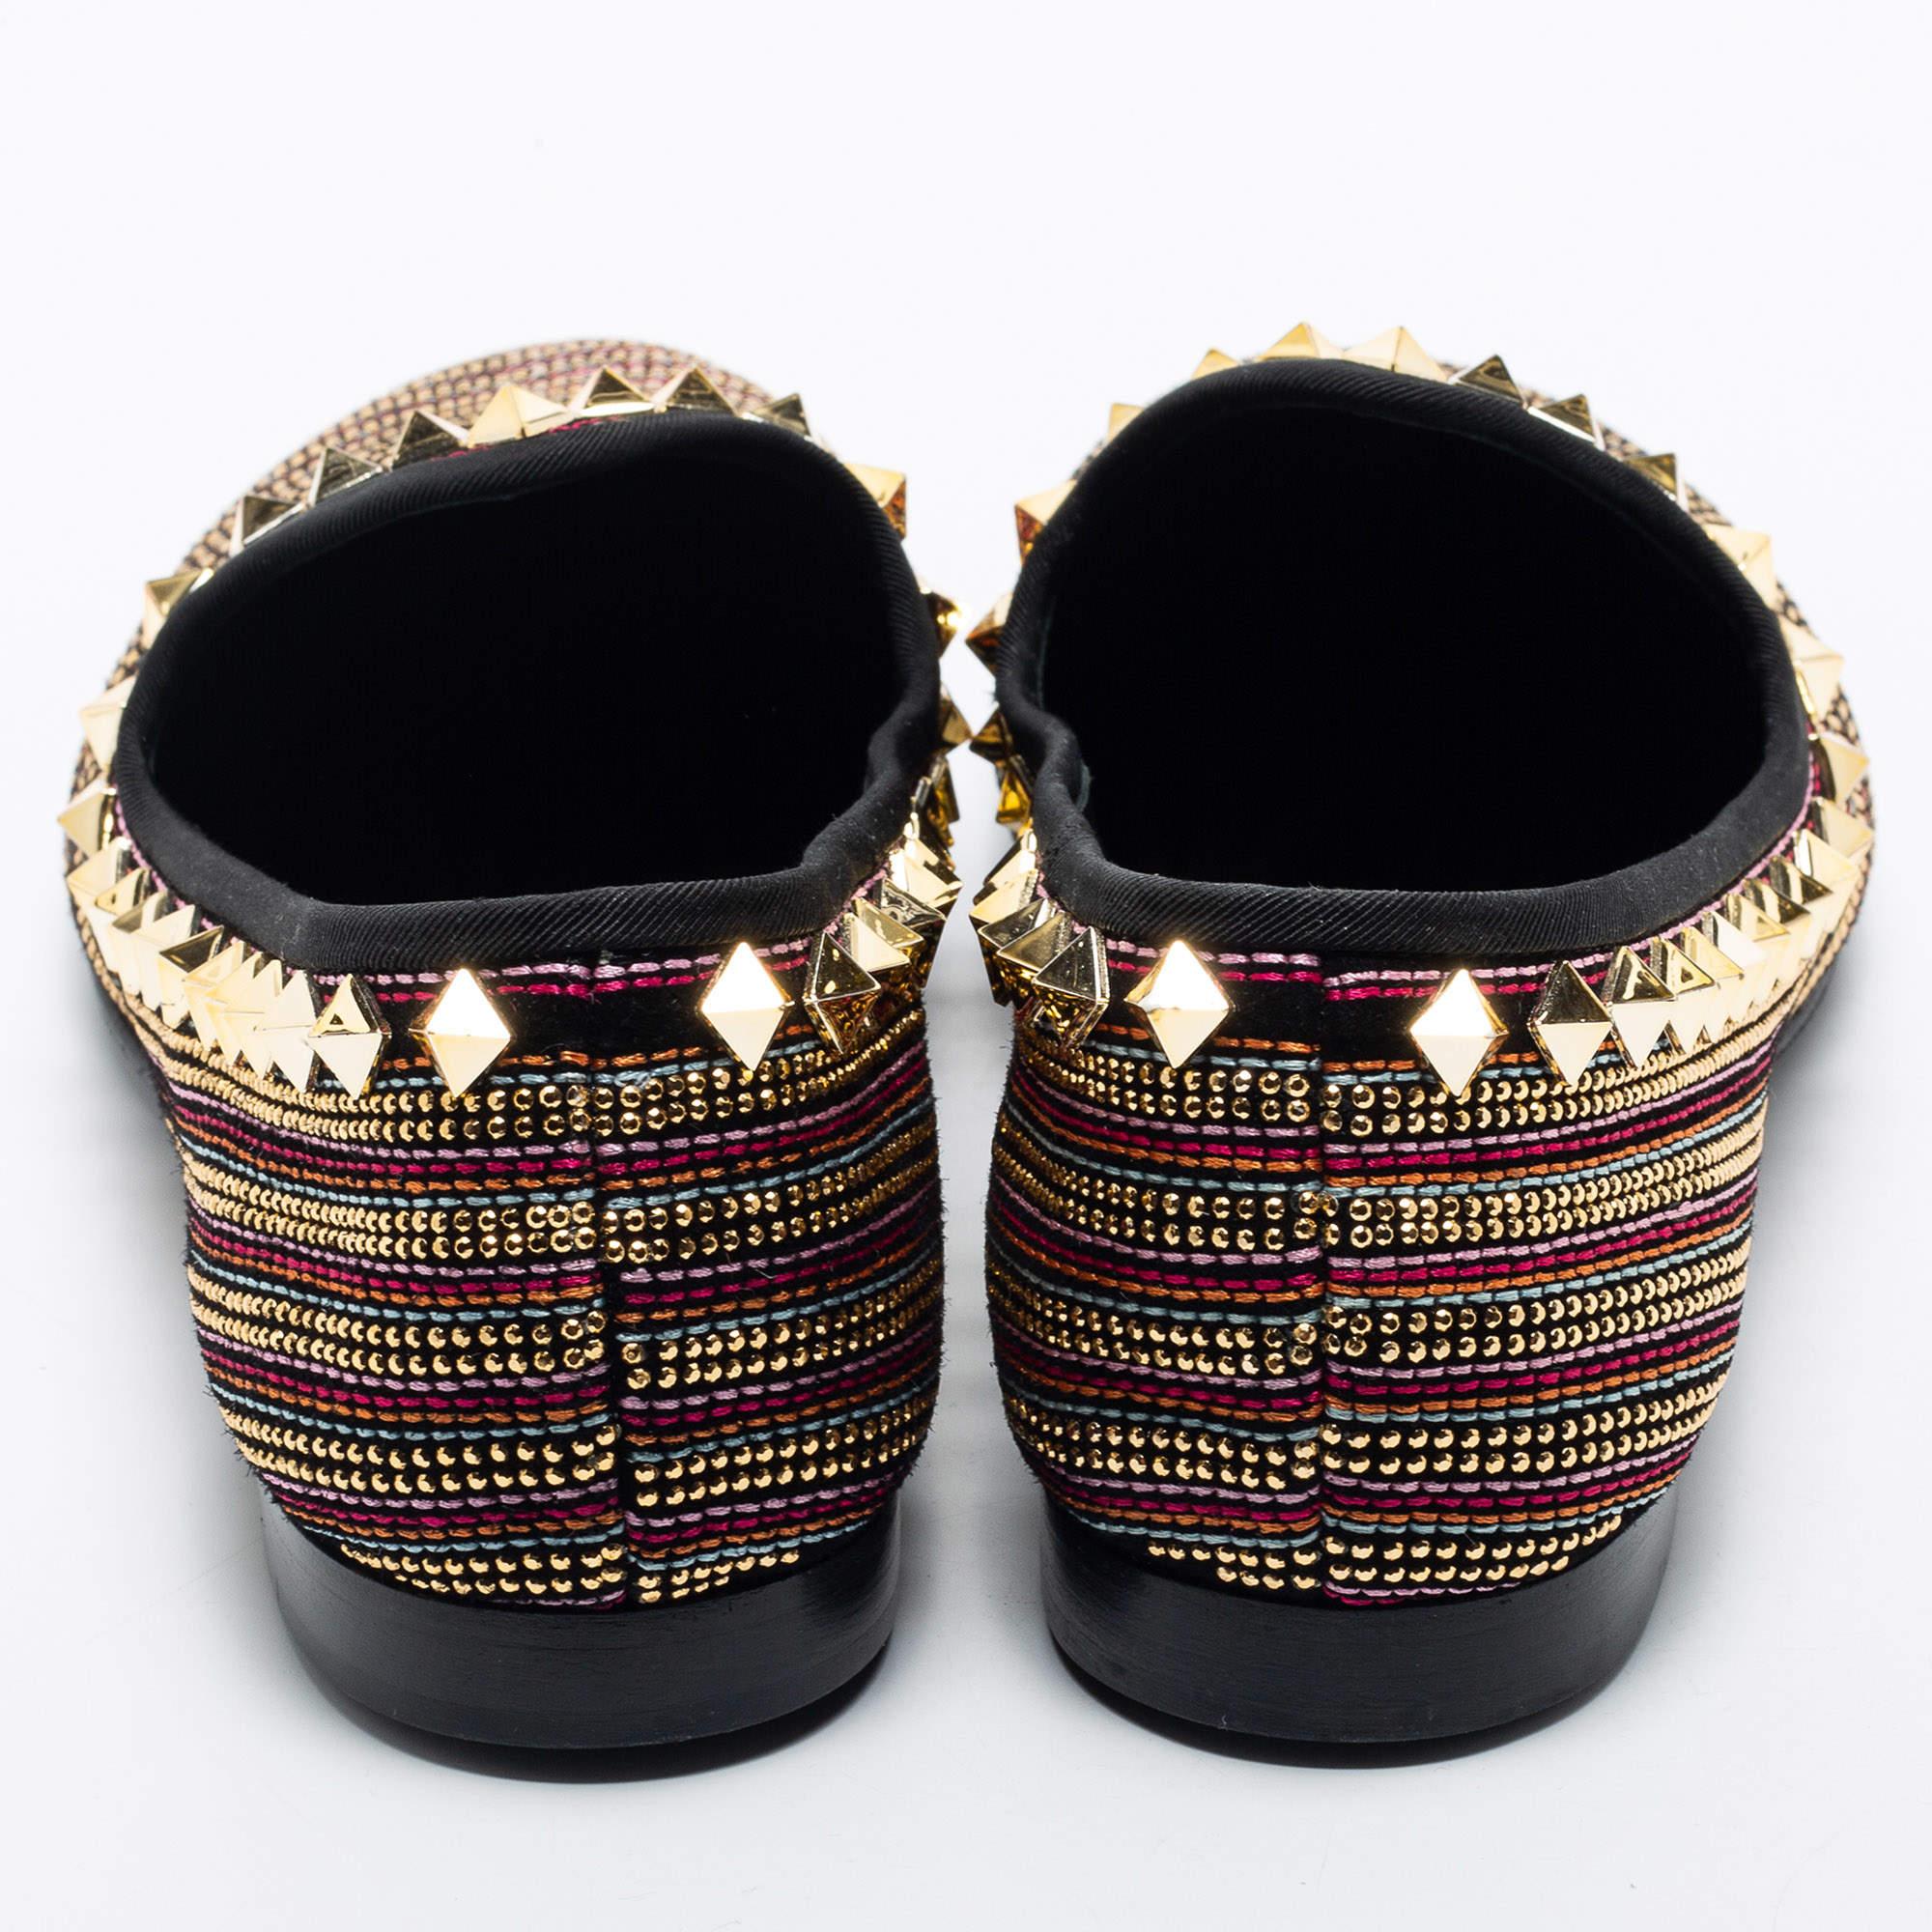 Black Giuseppe Zanotti Multicolor Embellished Suede Smoking Slippers Size 41 For Sale